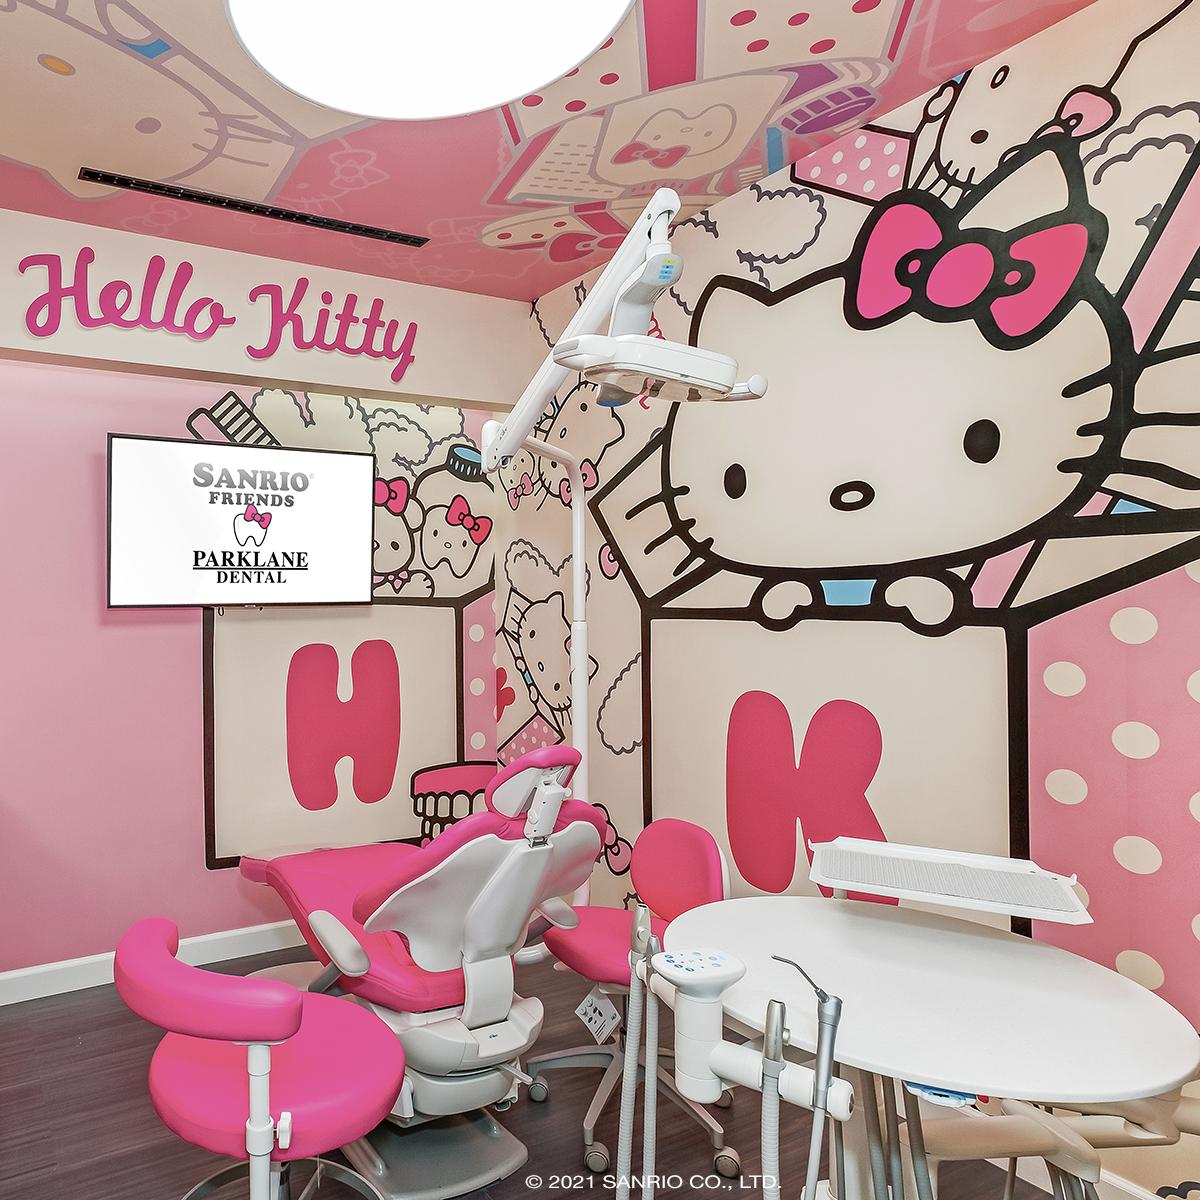 Happy #NationalDentistDay! 🦷 🎀 Dental care couldn't get any cuter than the supercute Hello Kitty-themed room at Parklane Dental in Temple City, CA . Adults and children welcome! 

Book an appointment here: bit.ly/3bmAKQr